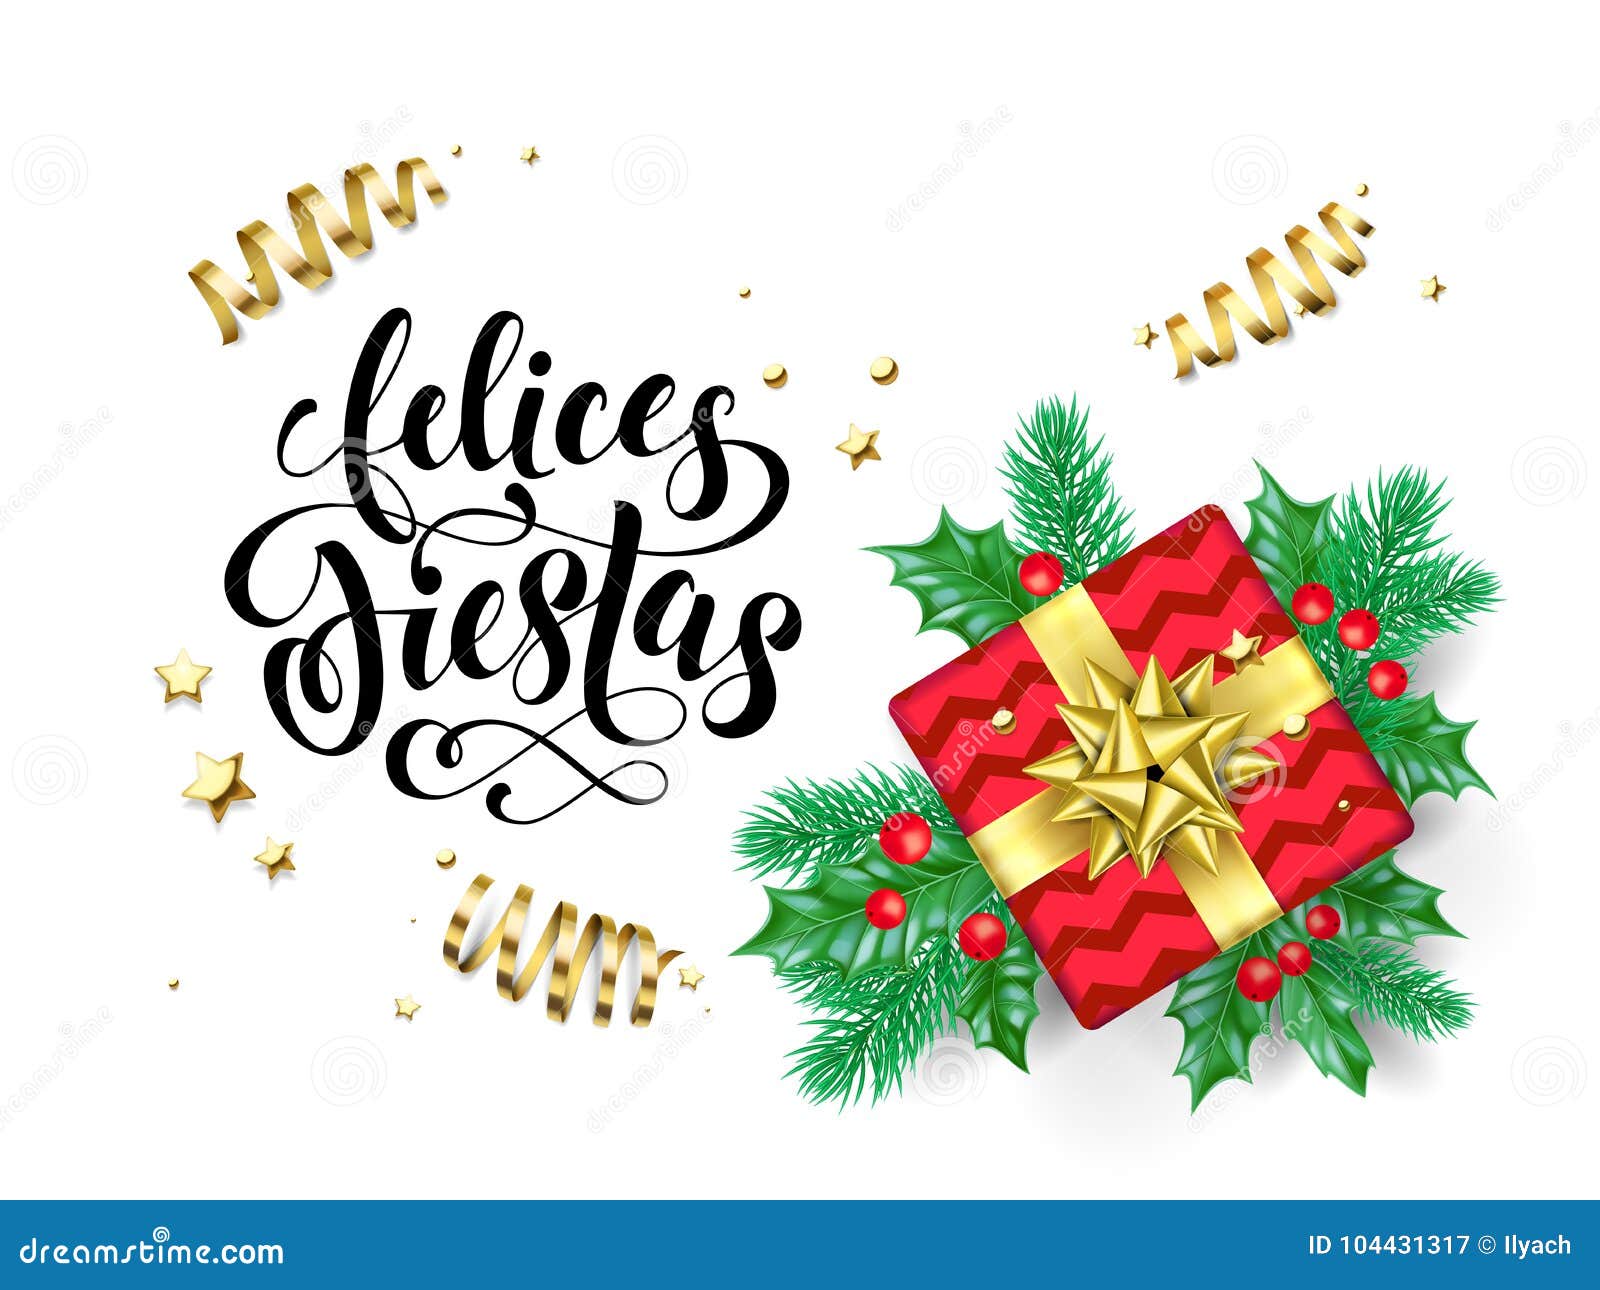 Download Felices Fiestas Spanish Happy Holidays Calligraphy Hand Drawn Text For Greeting Card Background Template